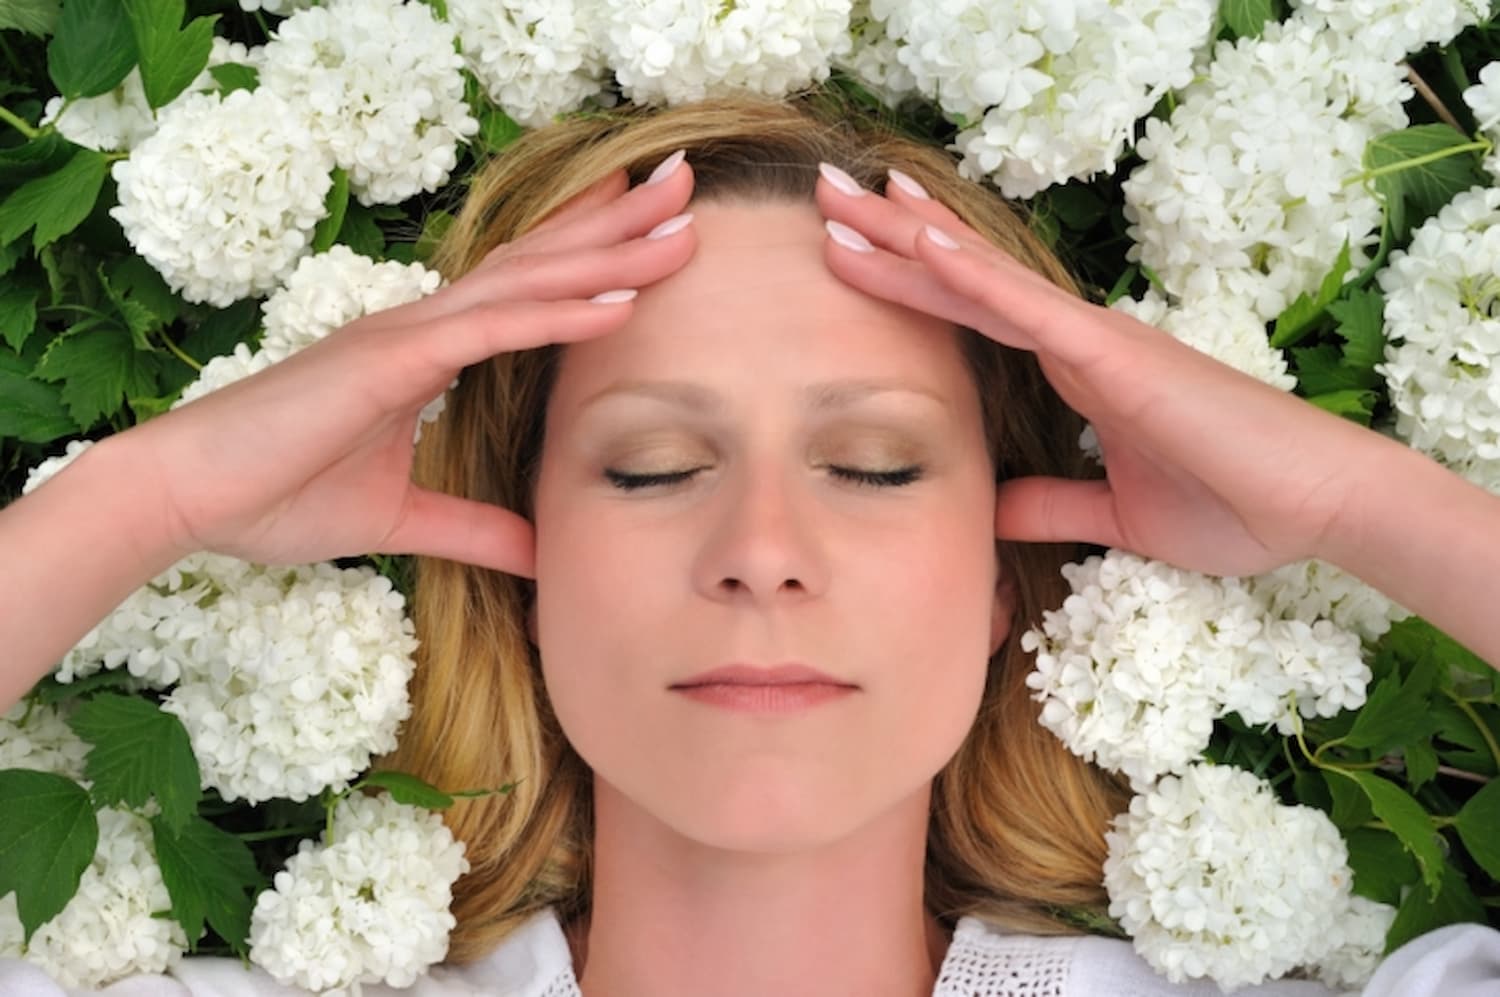 Relieving Stress With Polarity Therapy